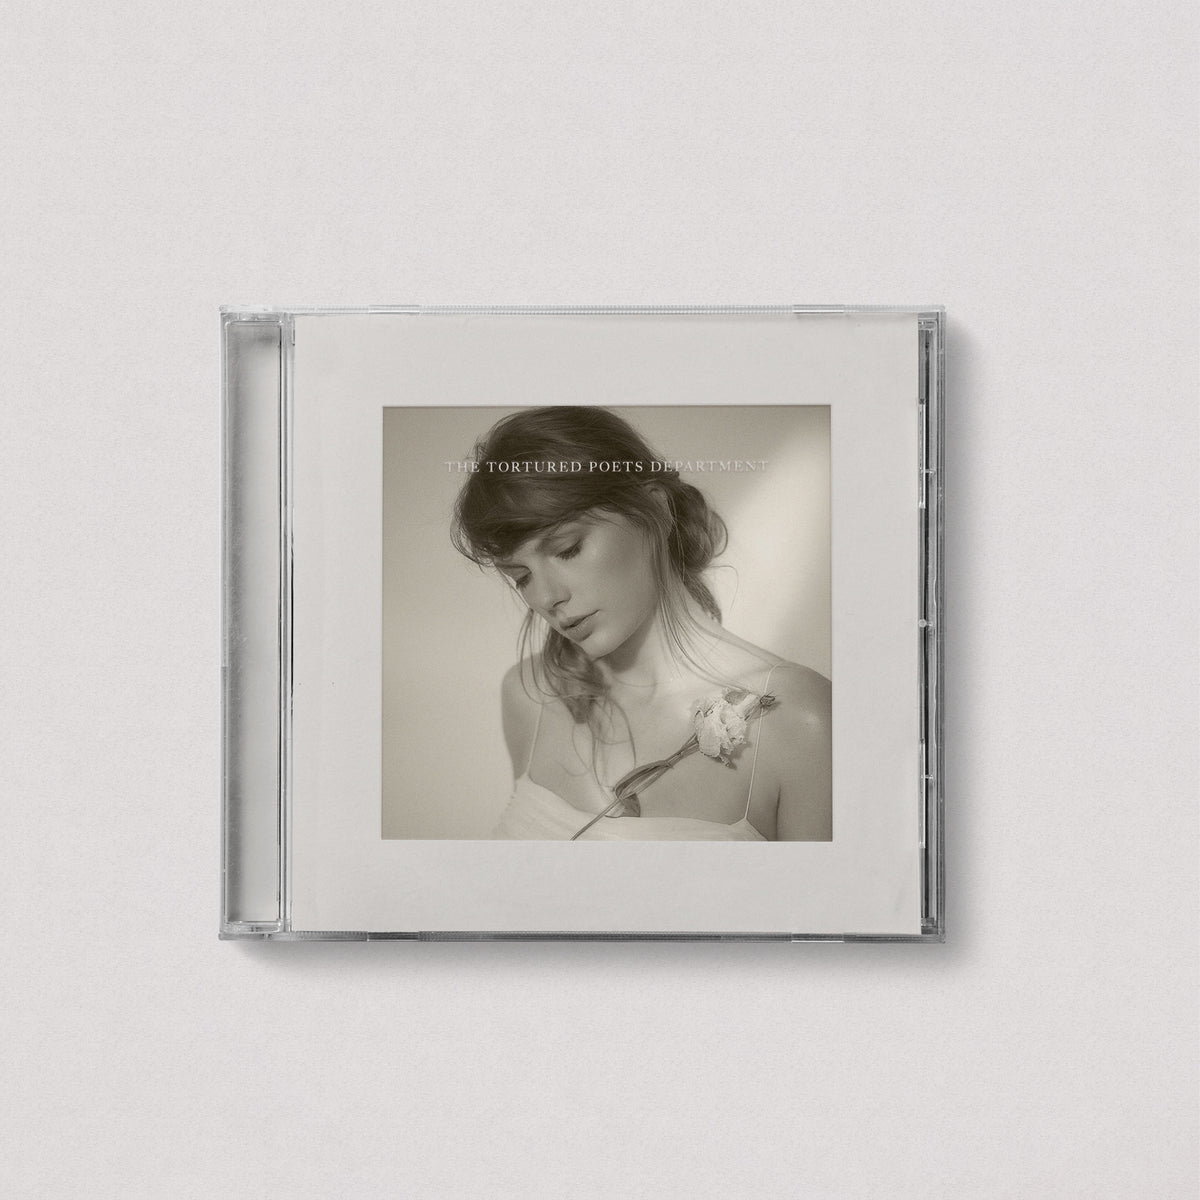 Taylor Swift - The Tortured Poets Department + Bonus Track "But Daddy I Love Him (Acoustic Version)" (Exclusive, CD)